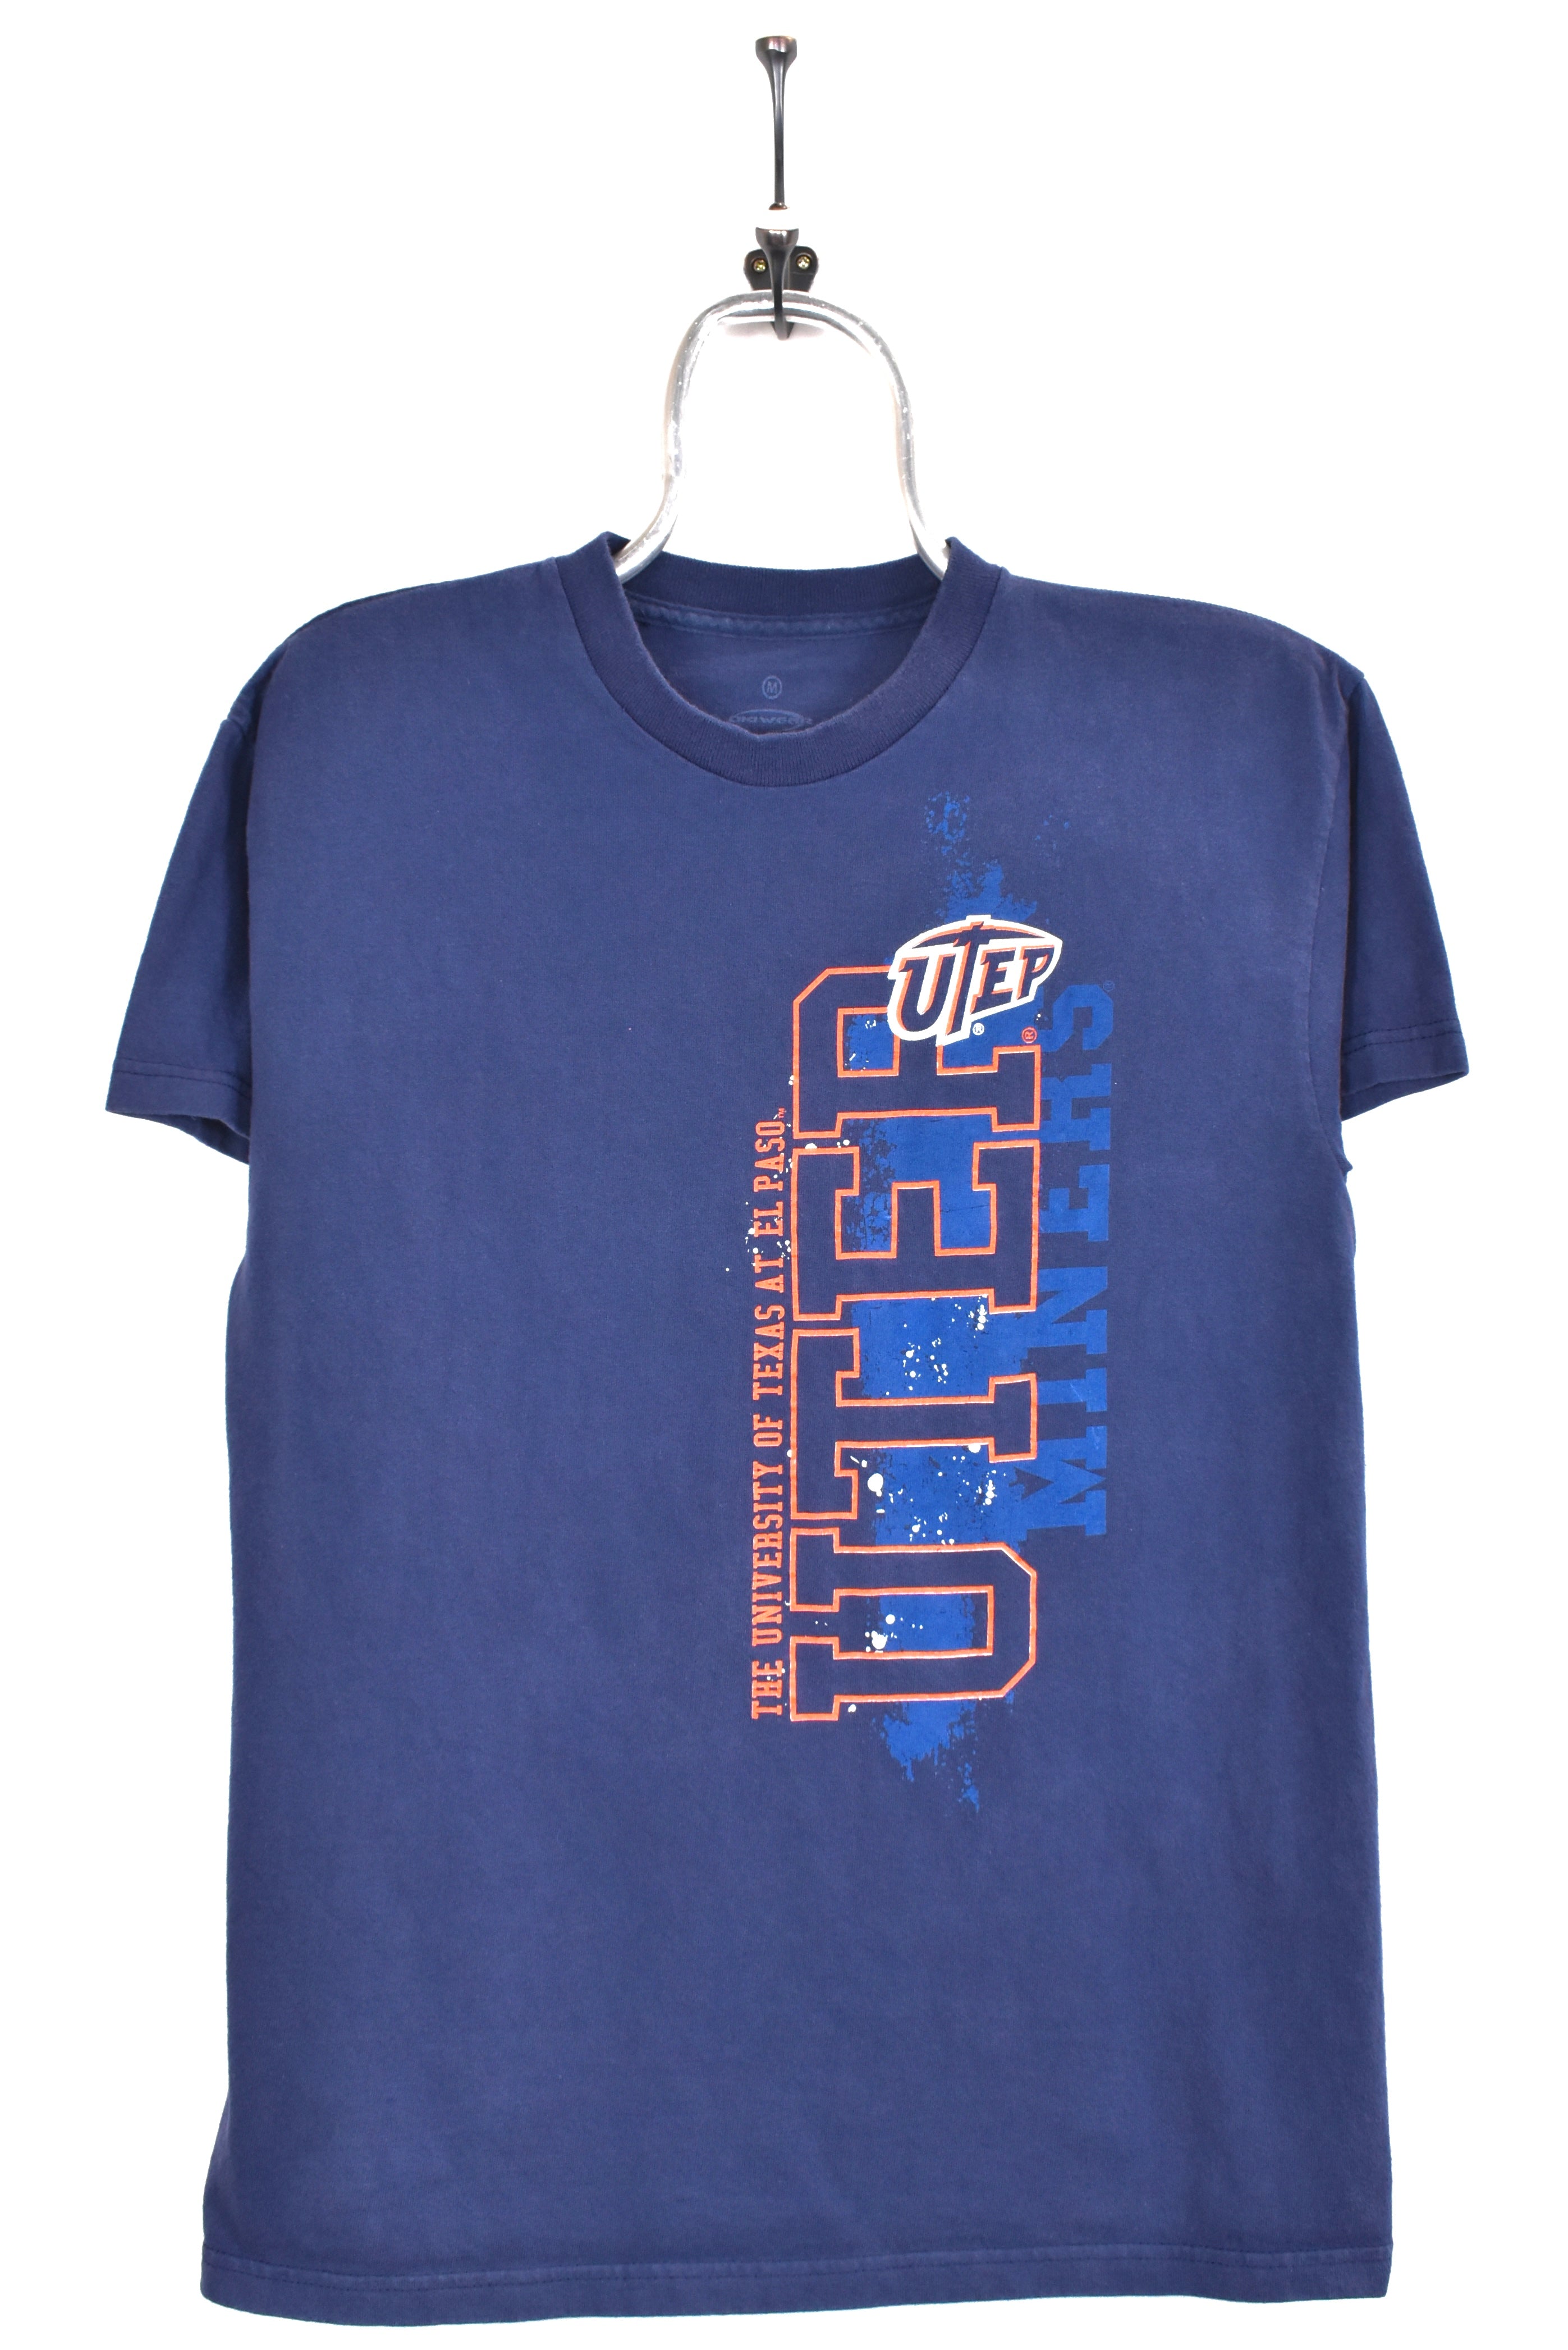 Vintage University of Texas shirt, navy blue graphic tee - AU Small COLLEGE